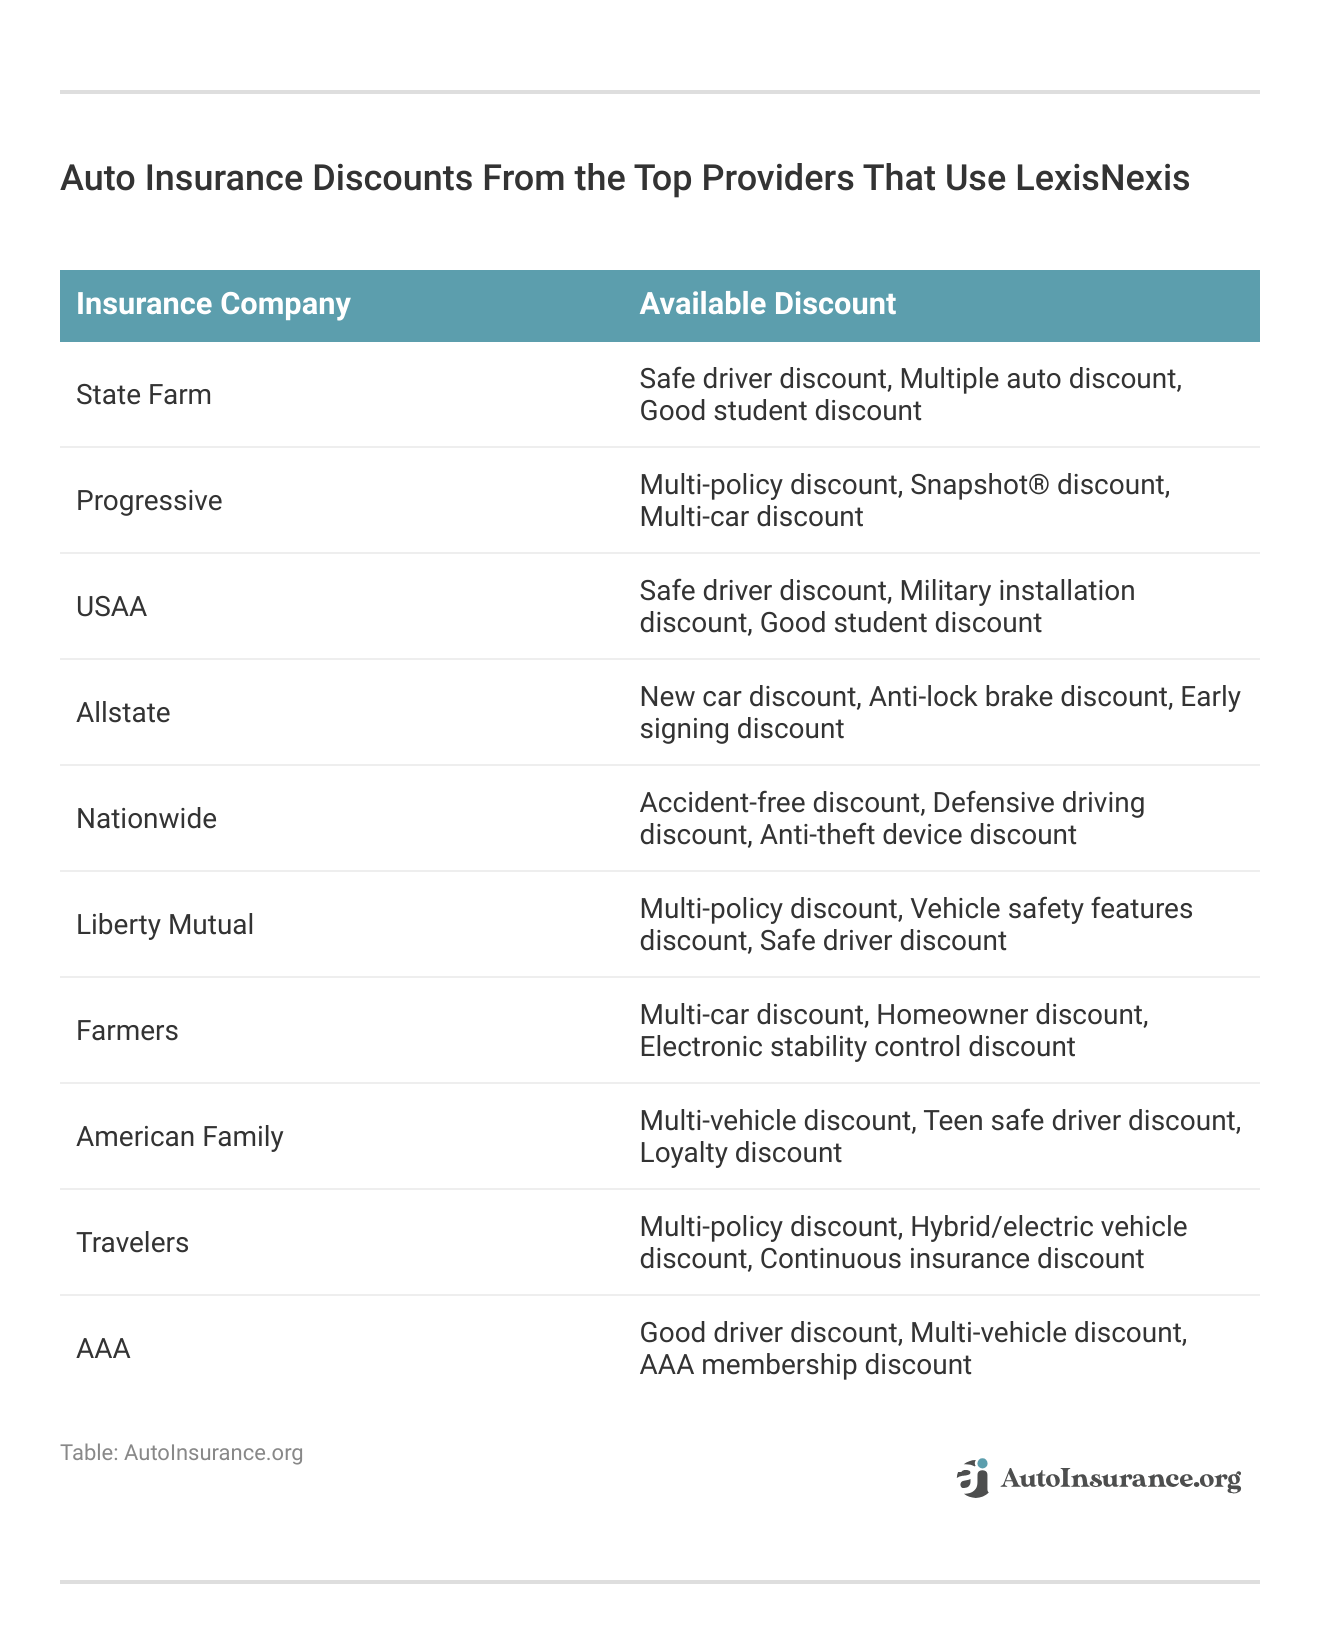 <h3>Auto Insurance Discounts From the Top Providers That Use LexisNexis</h3>